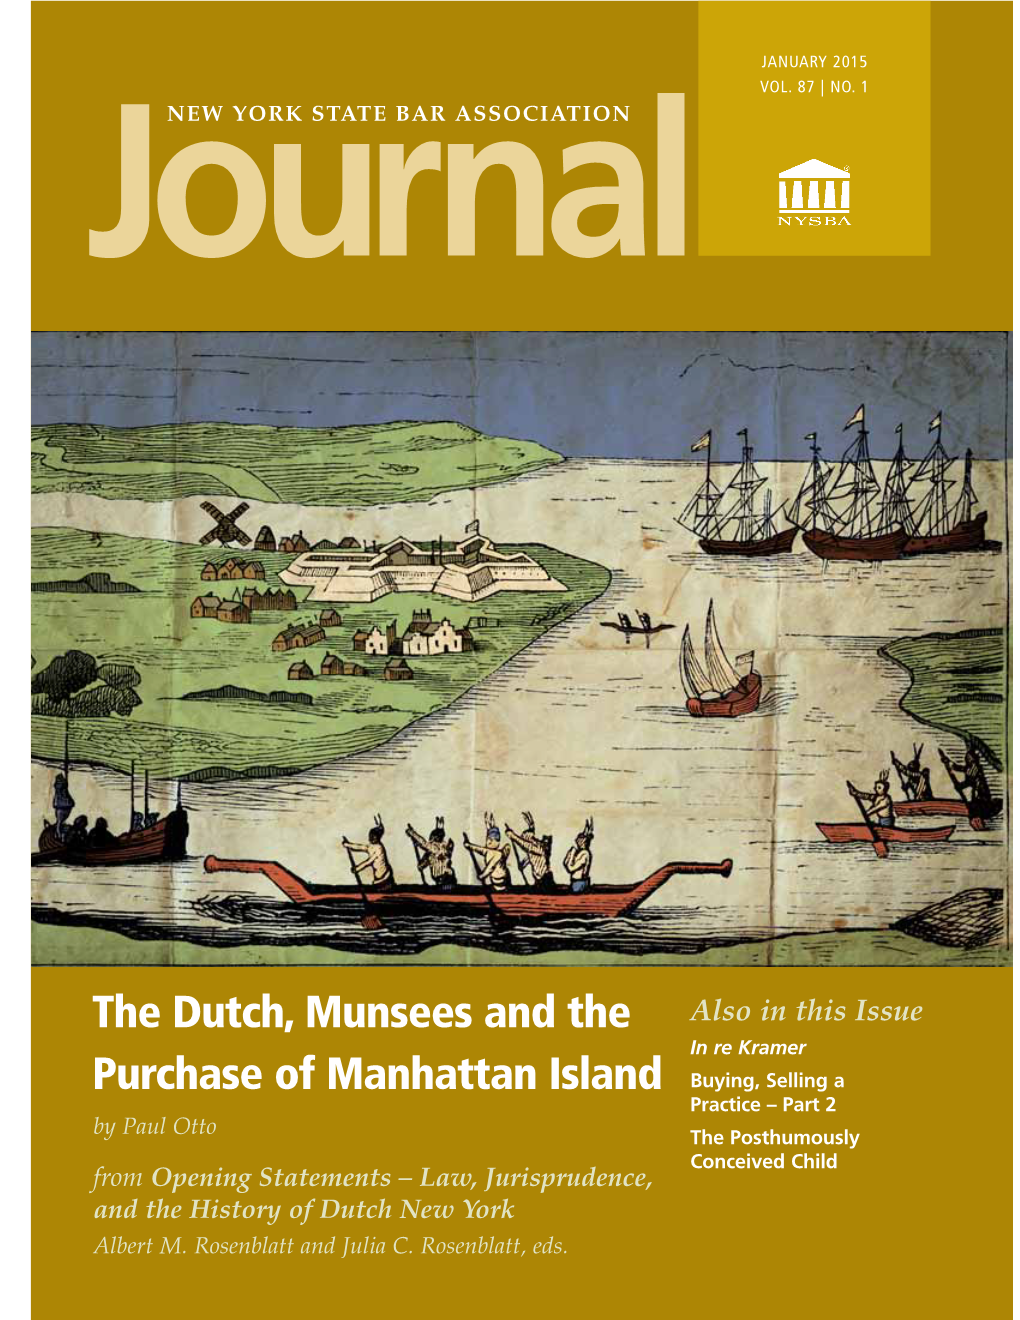 The Dutch, Munsees and the Purchase of Manhattan Island